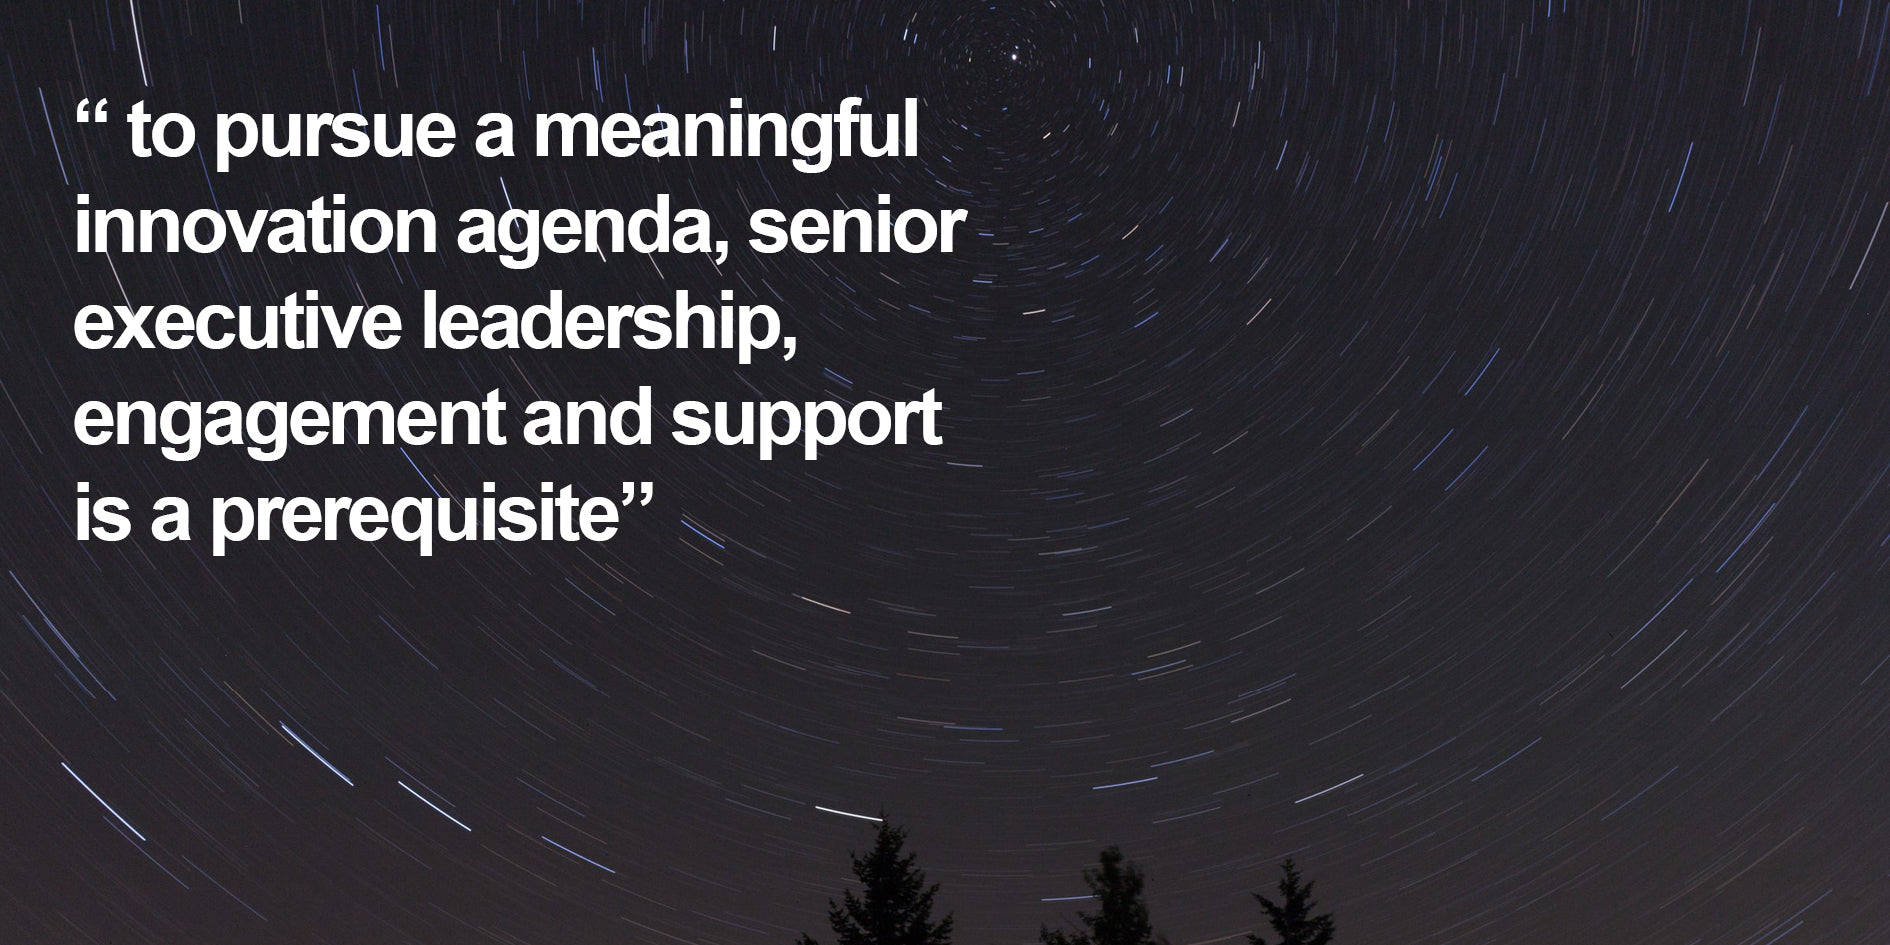 to pursue a meaningful innovation agenda, senior executive leadership, engagement and support is a prerequisite